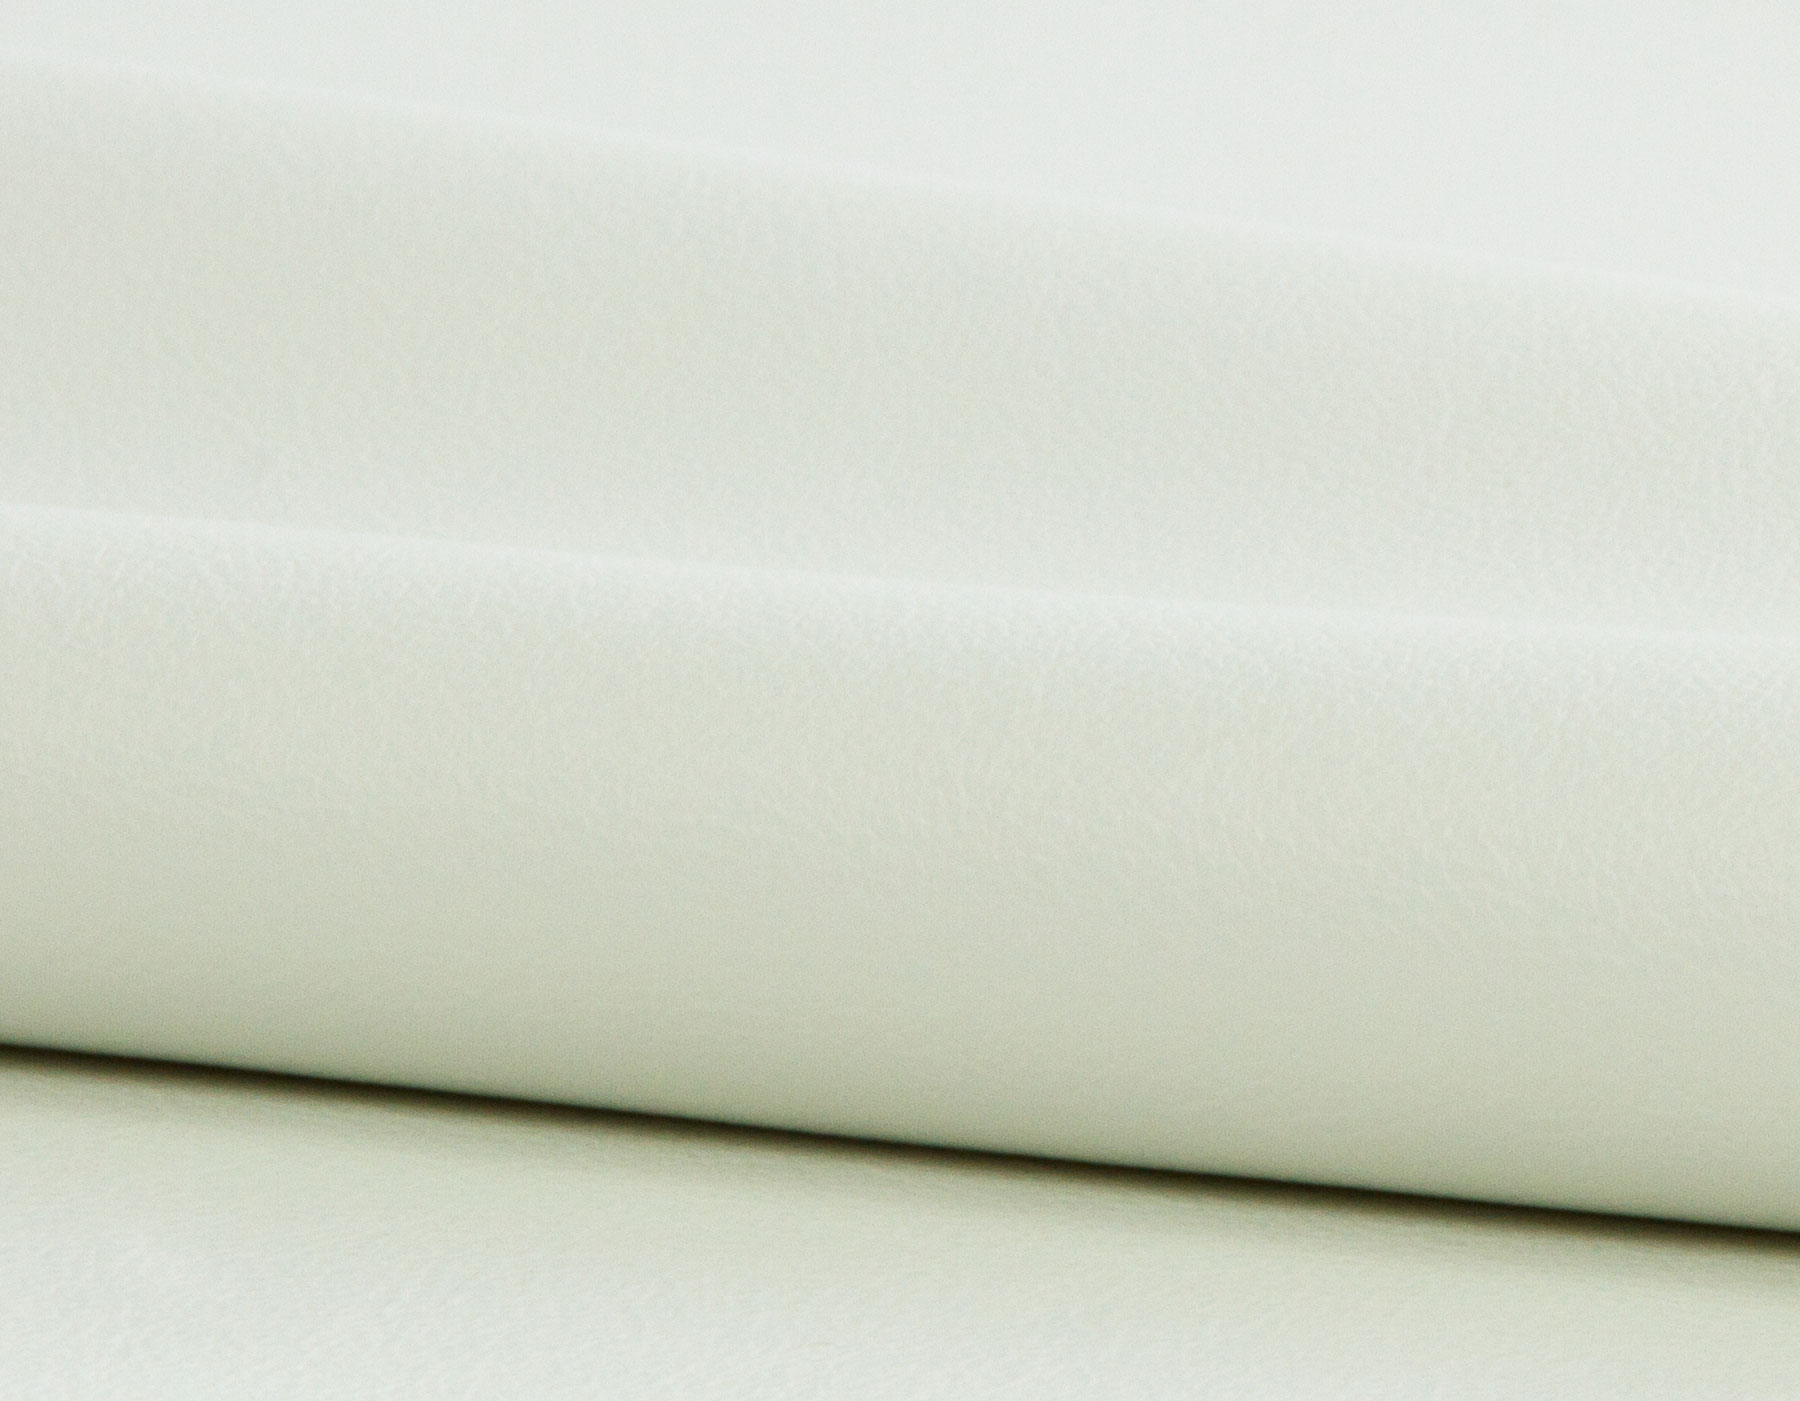 Genuine Leather Upholstery Fabric, White Leather Fabric